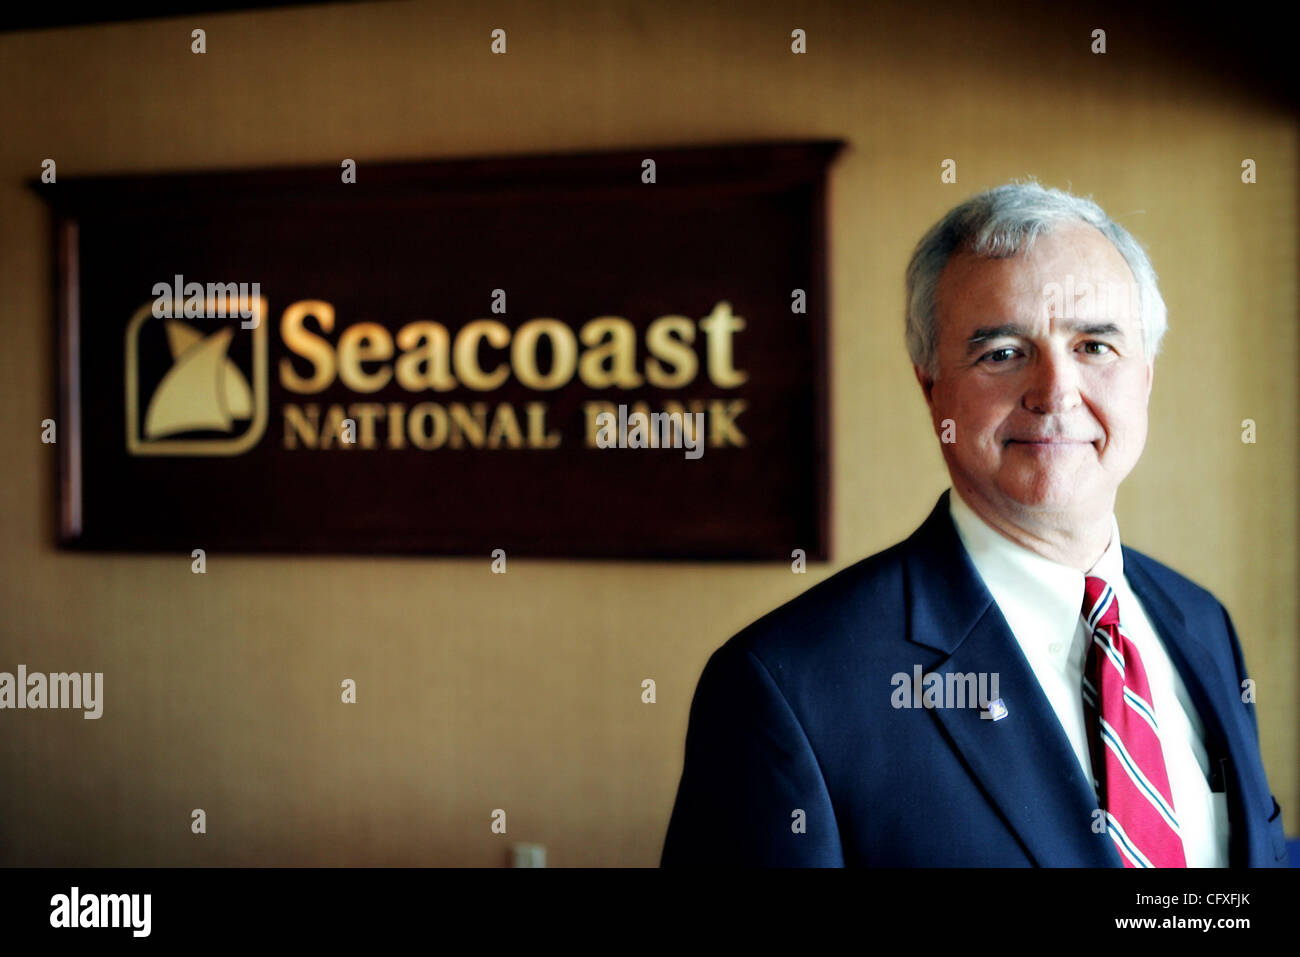 041207 biz Acosta Staff photo by Richard Graulich/The Palm Beach Post - 0036529A PALM BEACH GARDENS - Chic Acosta is the Executive Vice President of Residential Lending at Seacoast National Bank in Palm Beach Gardens.  For business Moving Up feature. Stock Photo